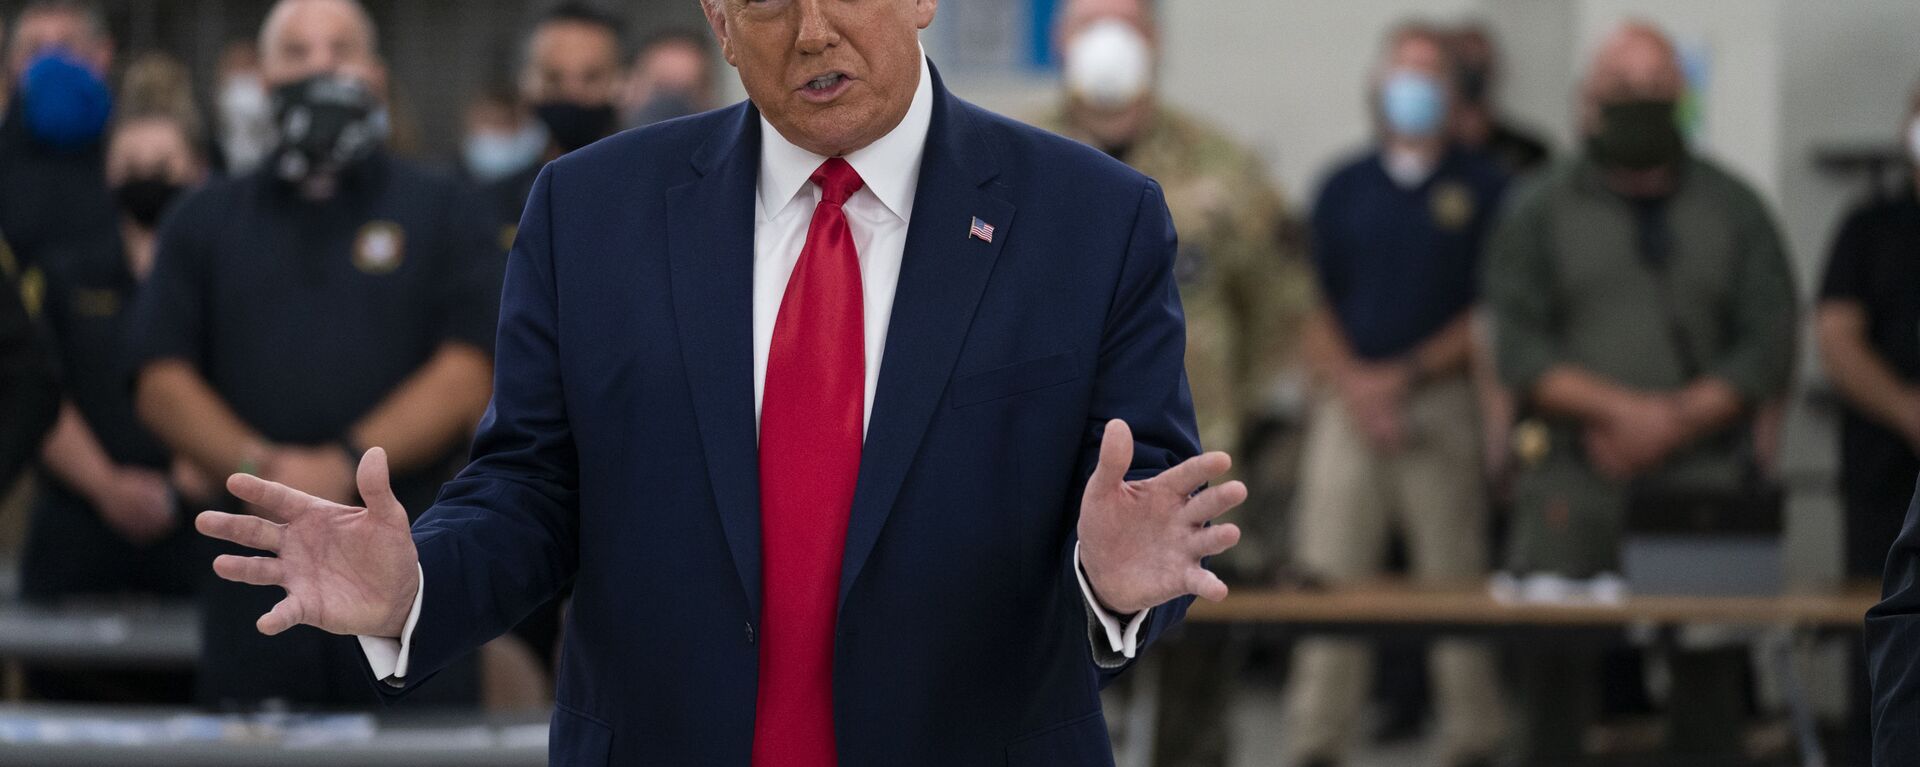 President Donald Trump speaks as he tours an emergency operations center and meets with law enforcement officers at Mary D. Bradford High School, Tuesday, Sept. 1, 2020, in Kenosha, Wis. - Sputnik International, 1920, 02.09.2020